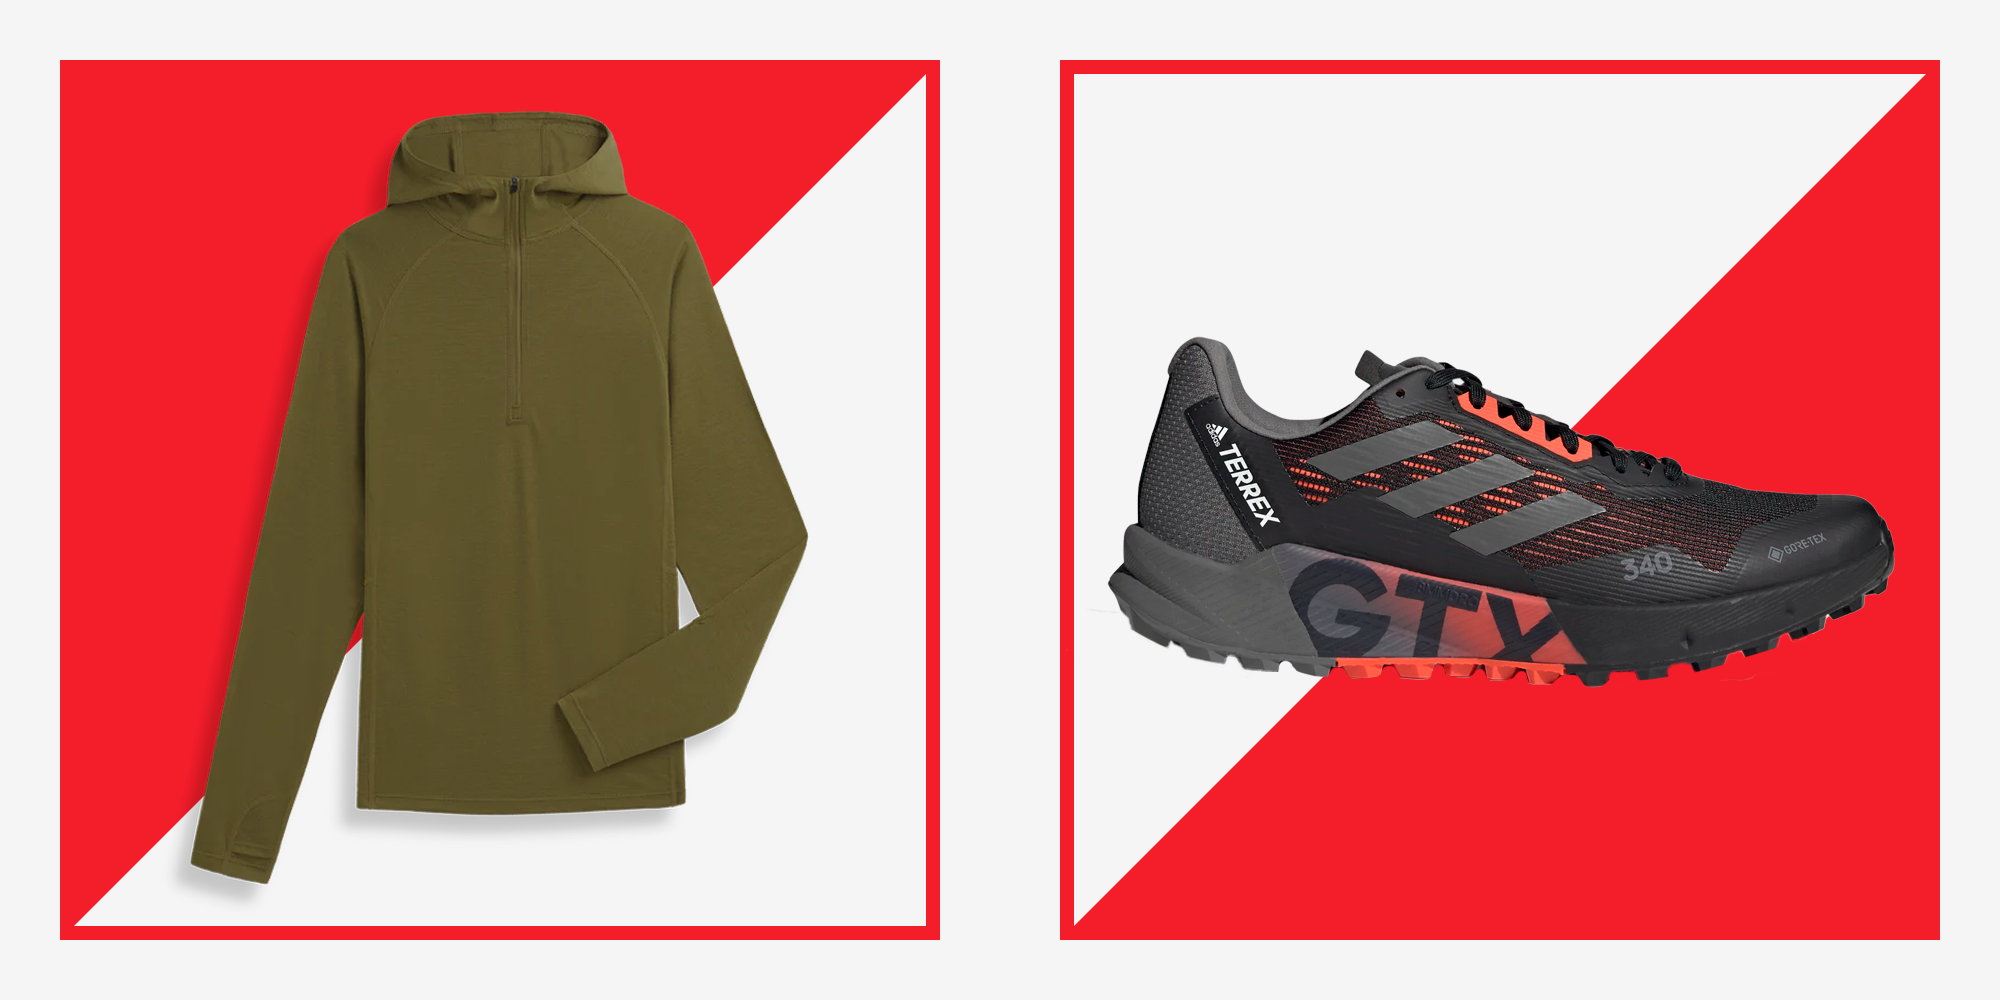 Winter Running Gear Guide: The Best Gear to Brave The Cold